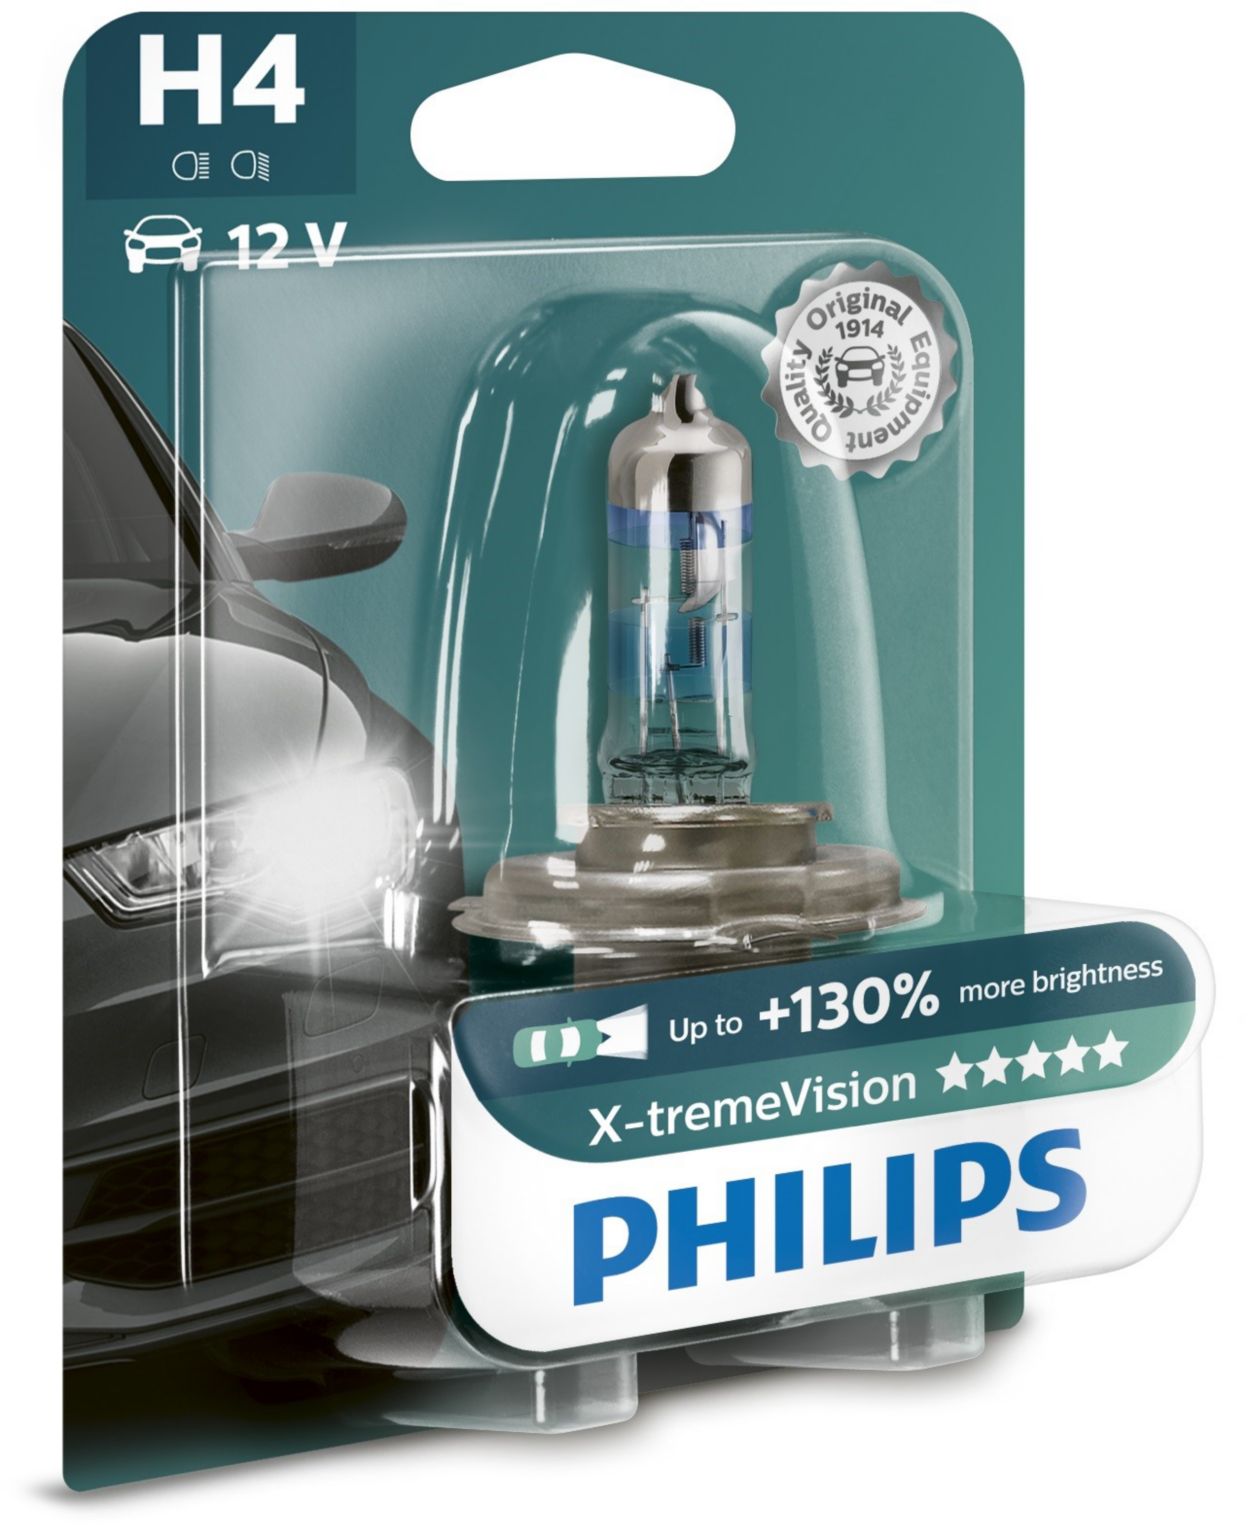 https://images.philips.com/is/image/philipsconsumer/6ad3ea2fd7d64e869488afab00d23215?$jpglarge$&wid=1250